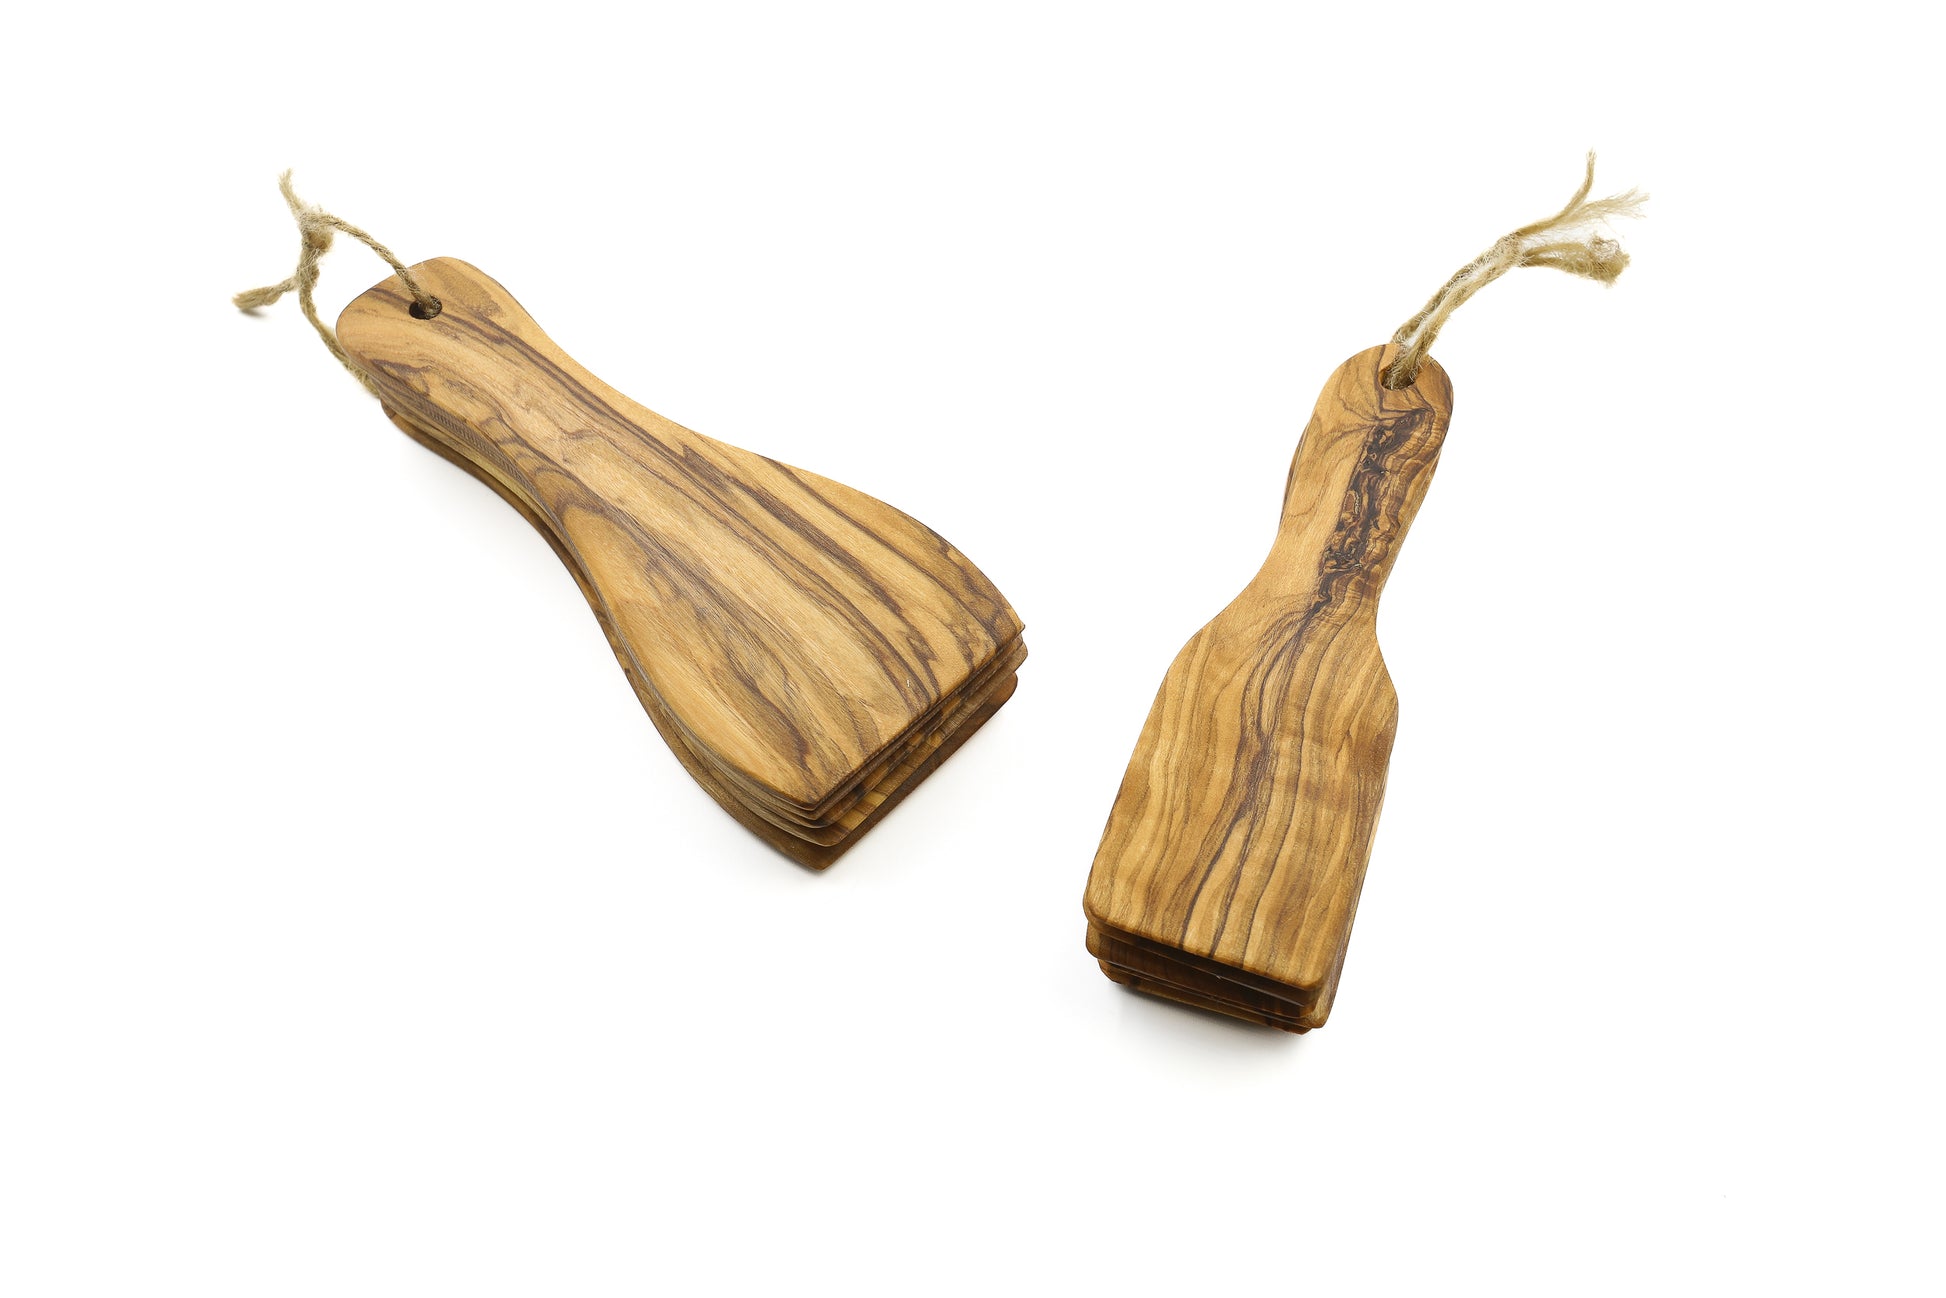 Olive wood raclette spatula set with 6 finely designed pieces